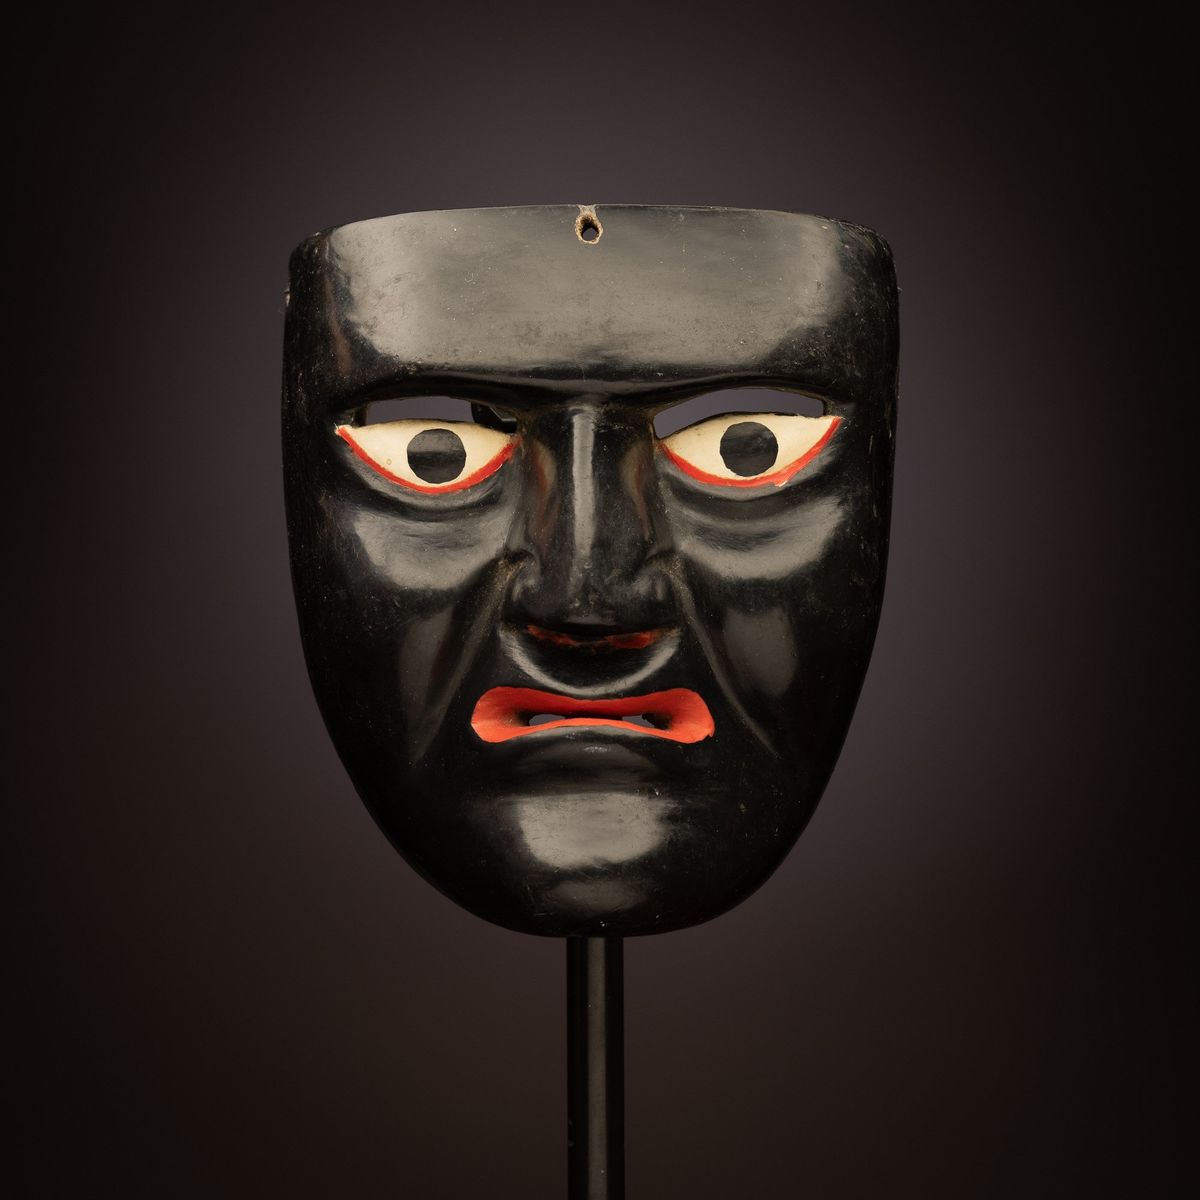 Curated by GU professor Pavel Shlossberg, “Dancing with Life: Mexican Masks” opens this weekend at the Northwest Museum of Arts and Culture. The exhibition will feature a selection of 54 masks, some from the museum’s archives and others acquired specially for the show. Opening Saturday, the exhibition will run through April 16, 2023. 